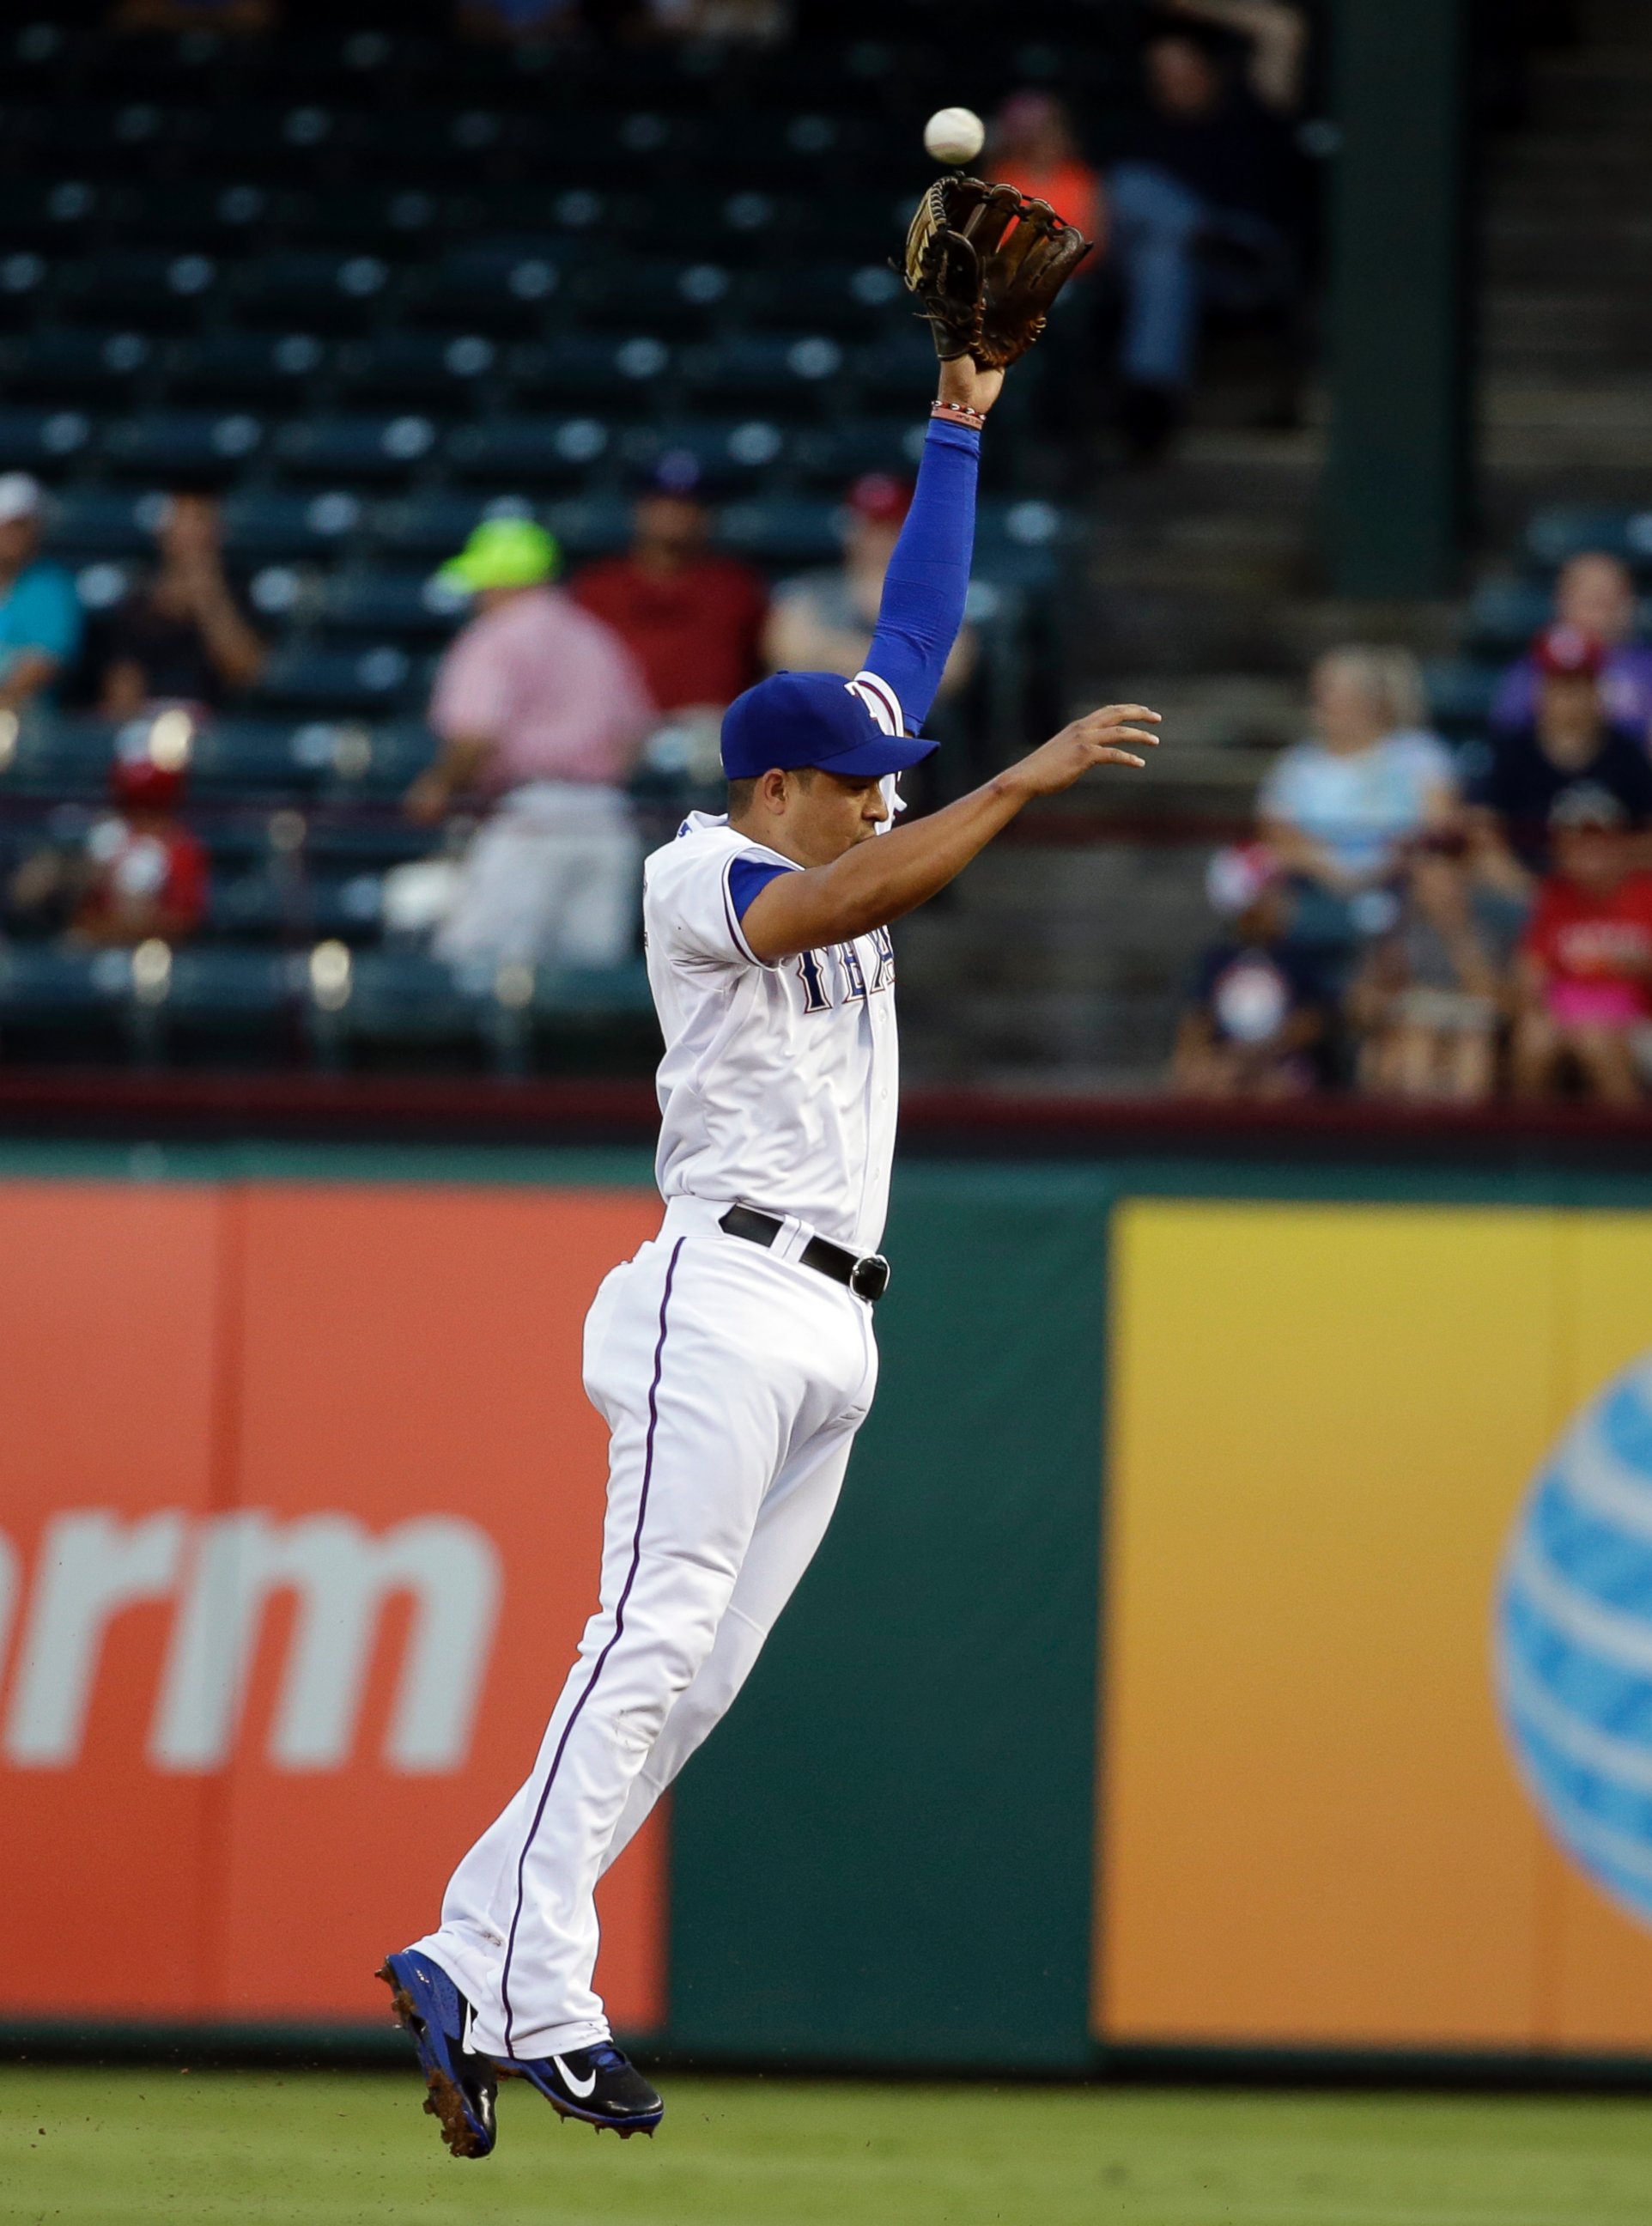 PHOTO: Texas Rangers second baseman Guilder Rodriguez leaps but is unable to grab a single by Los Angeles Angels' Howie Kendrick, Sept. 9, 2014, in Arlington, Texas.